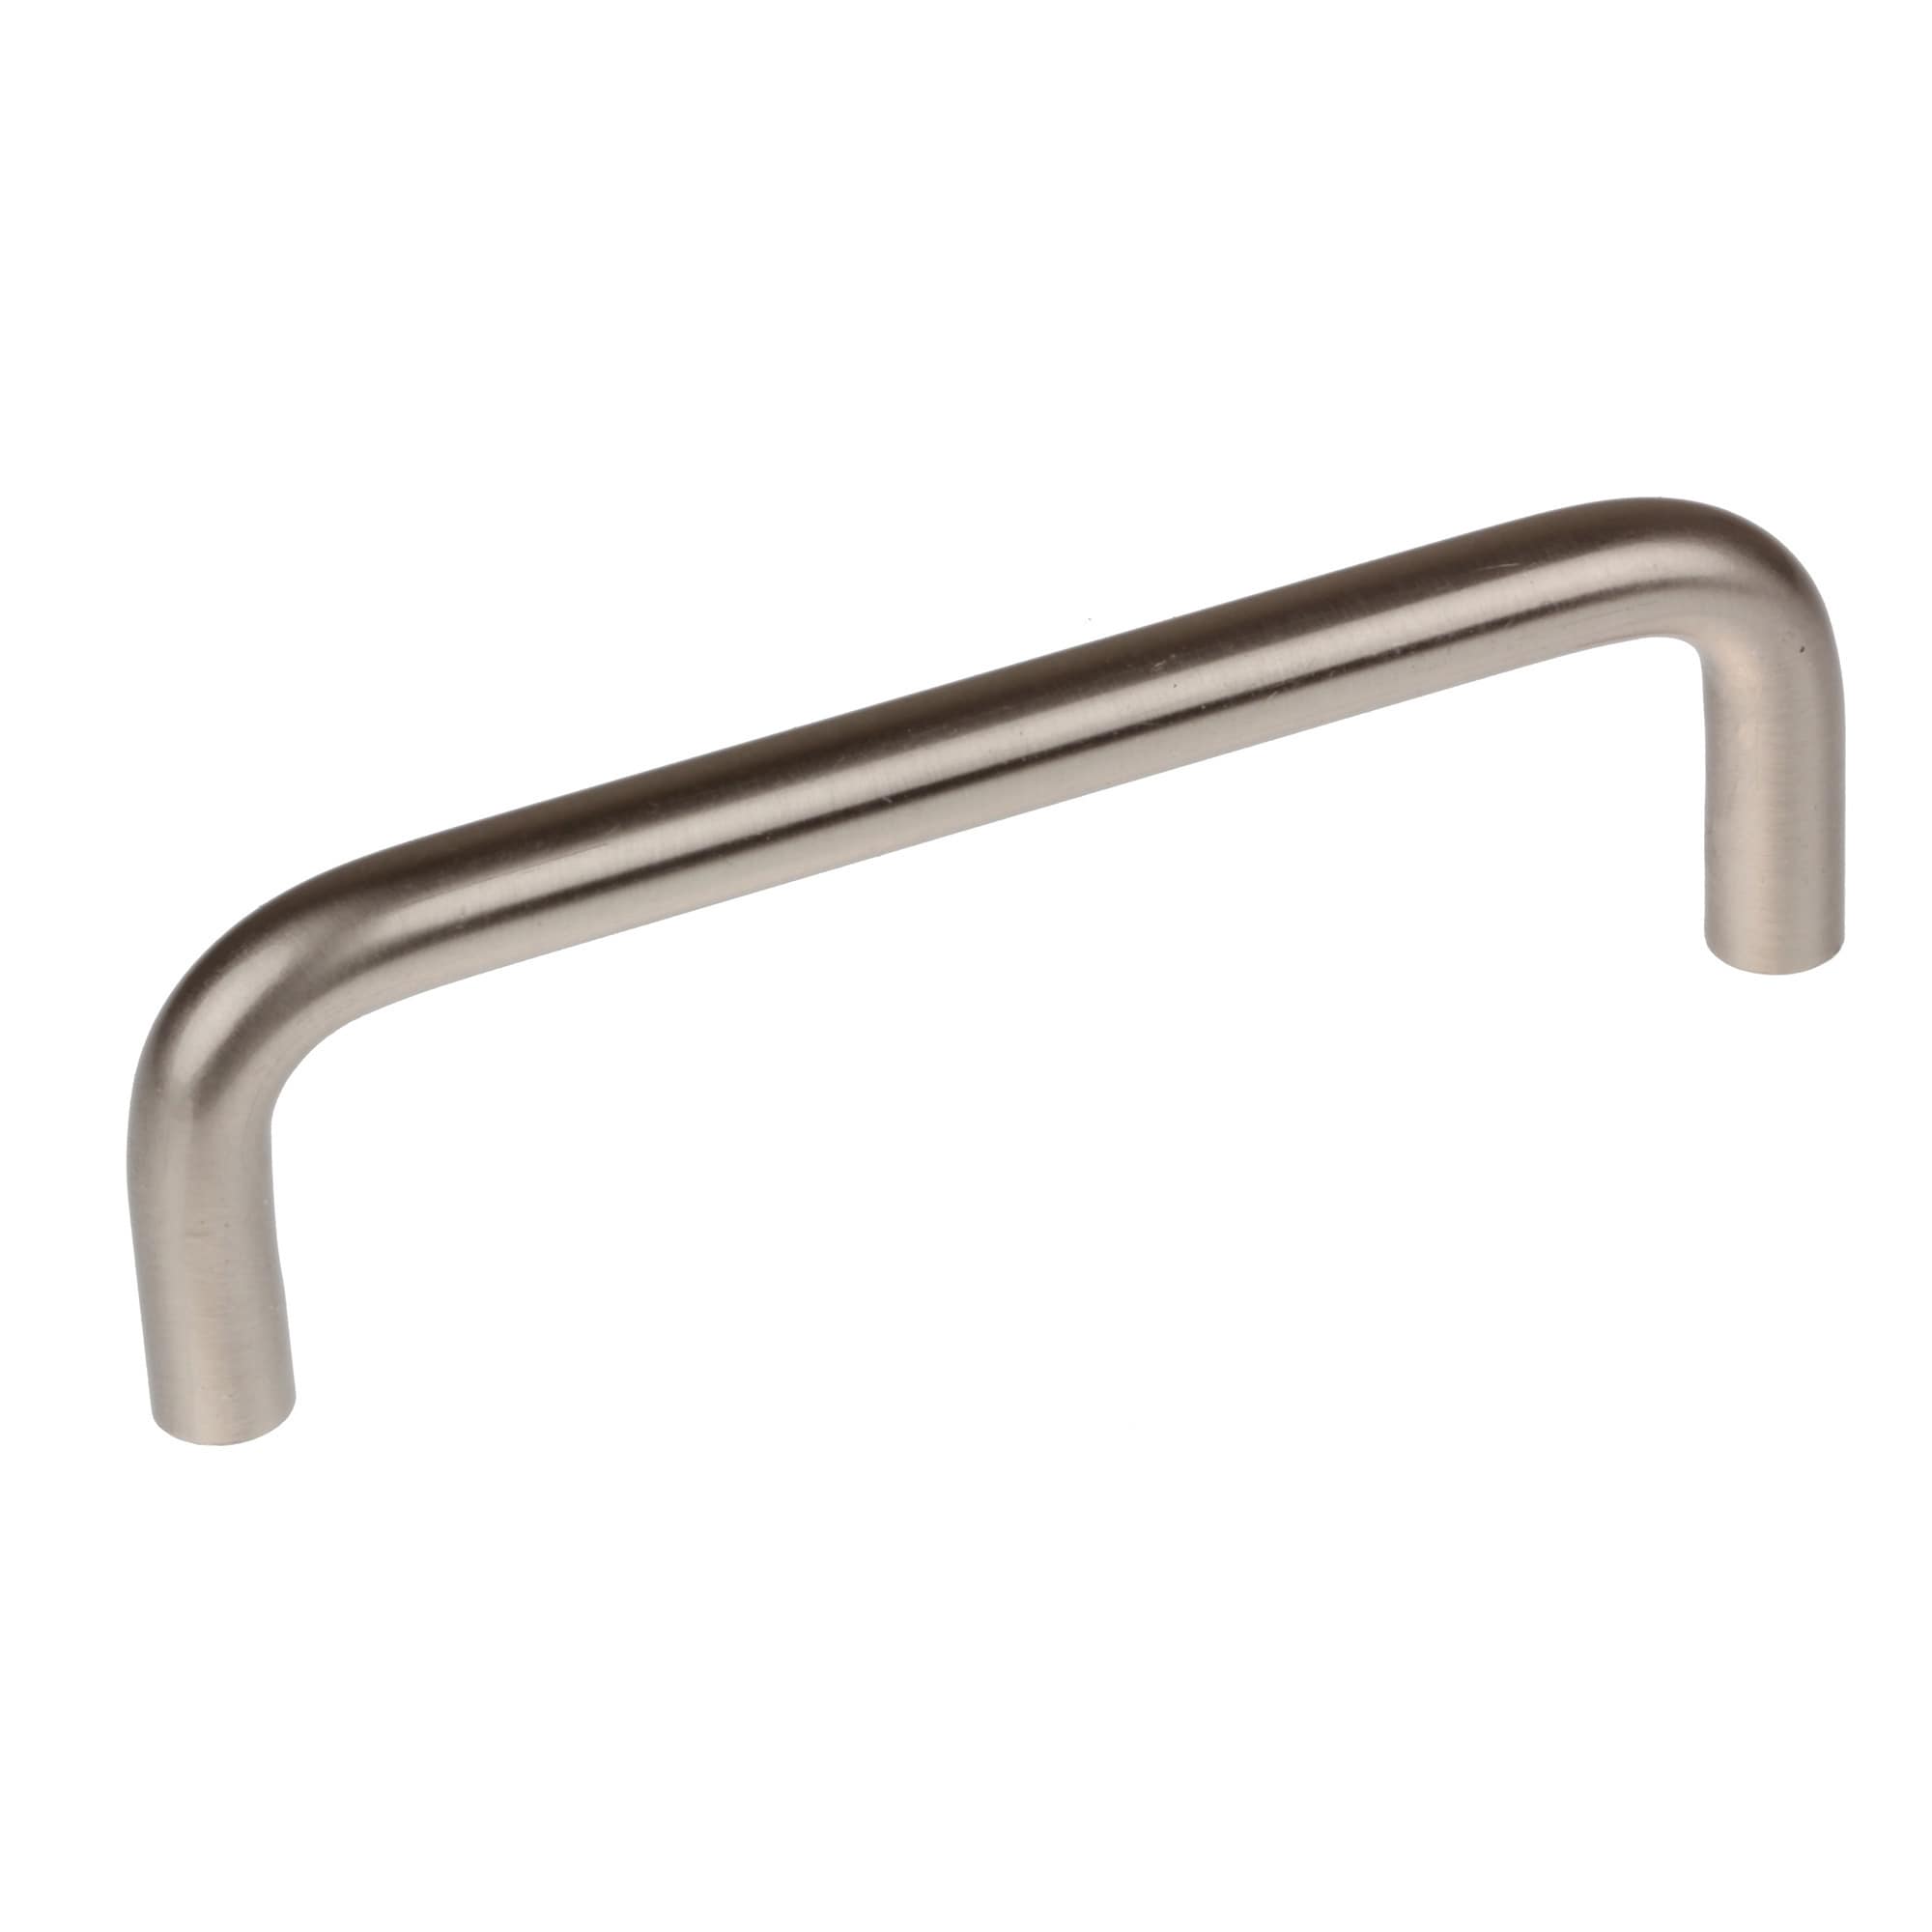 Shop Gliderite 4 Inch Stainless Steel Finished Cabinet Wire Pulls